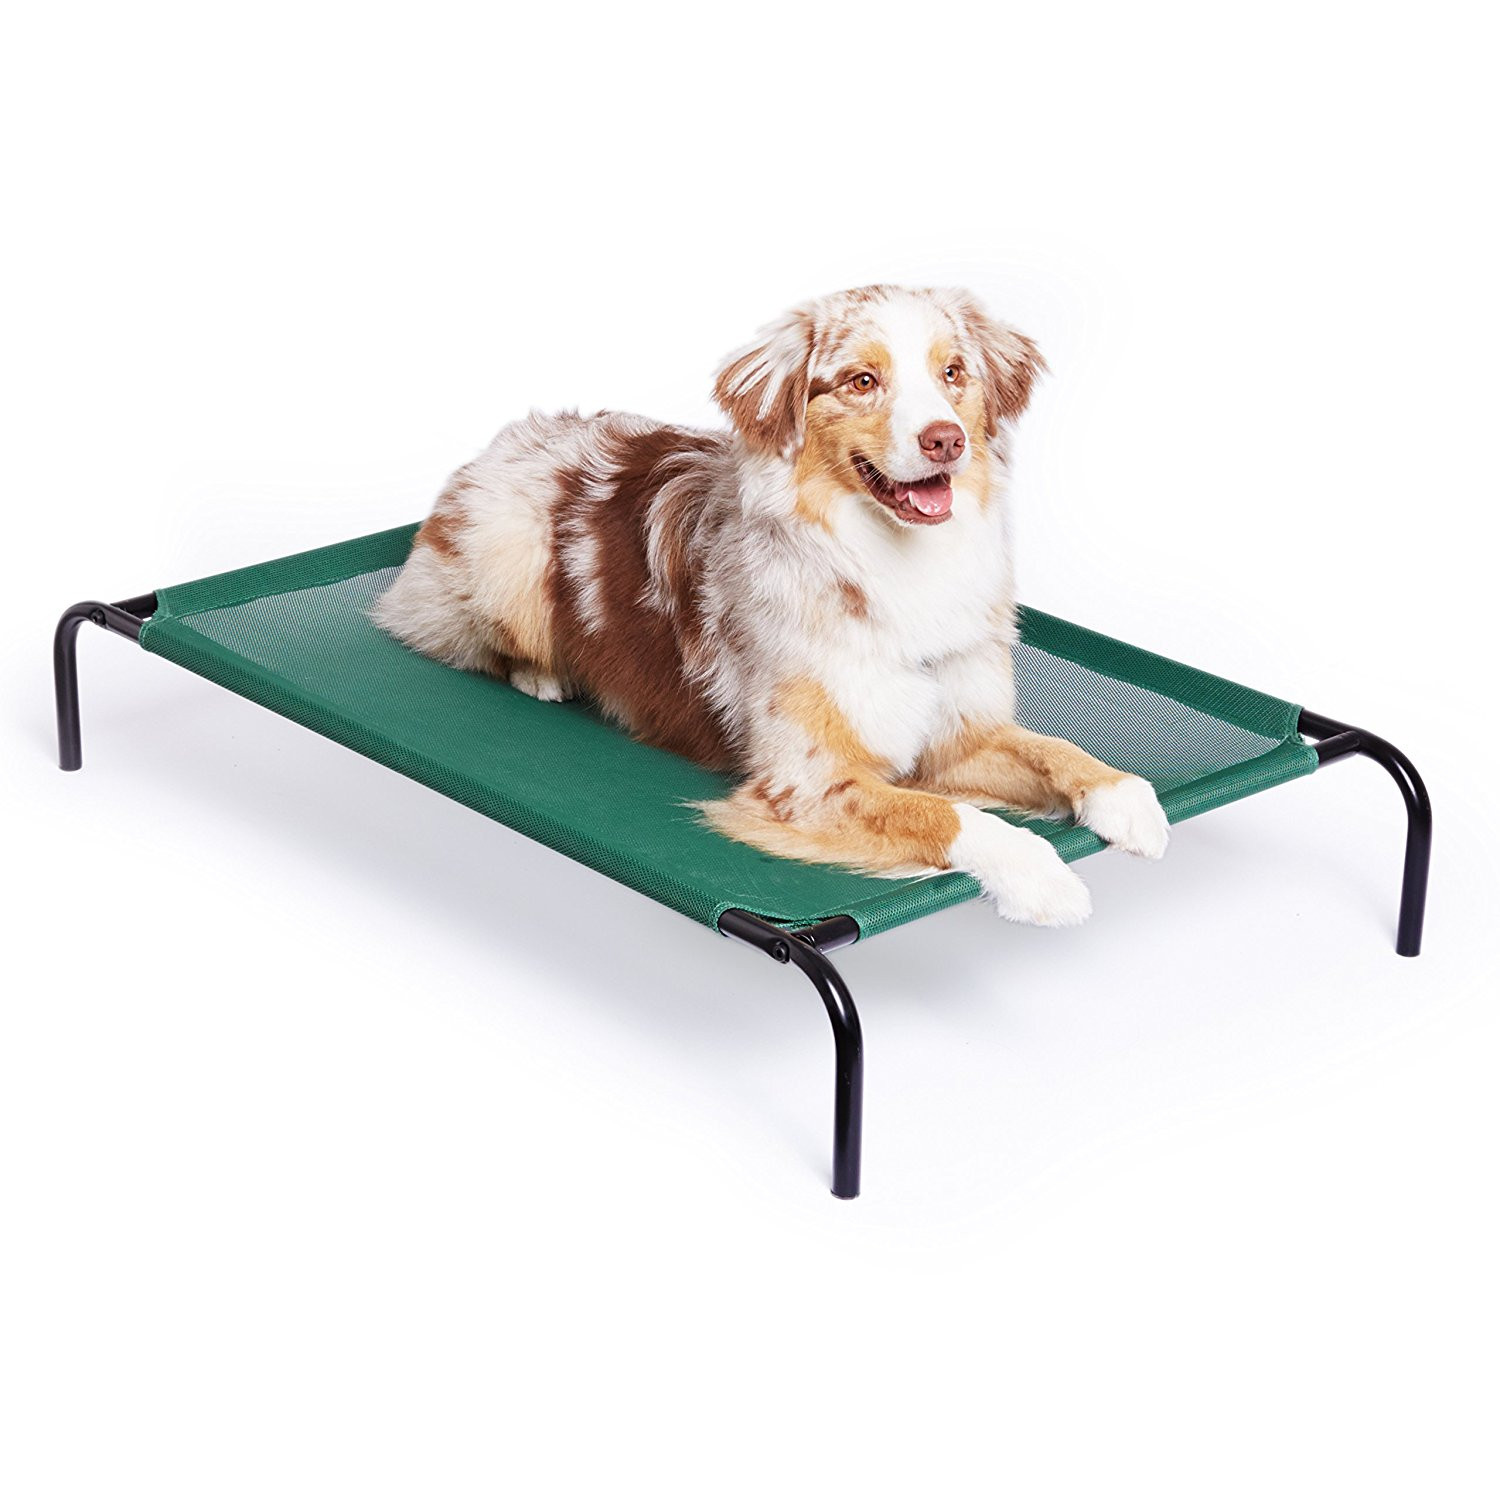 DIY Elevated Dog Bed
 DIY – How to Make NO SEW Elevated Dog Beds Out of PVC